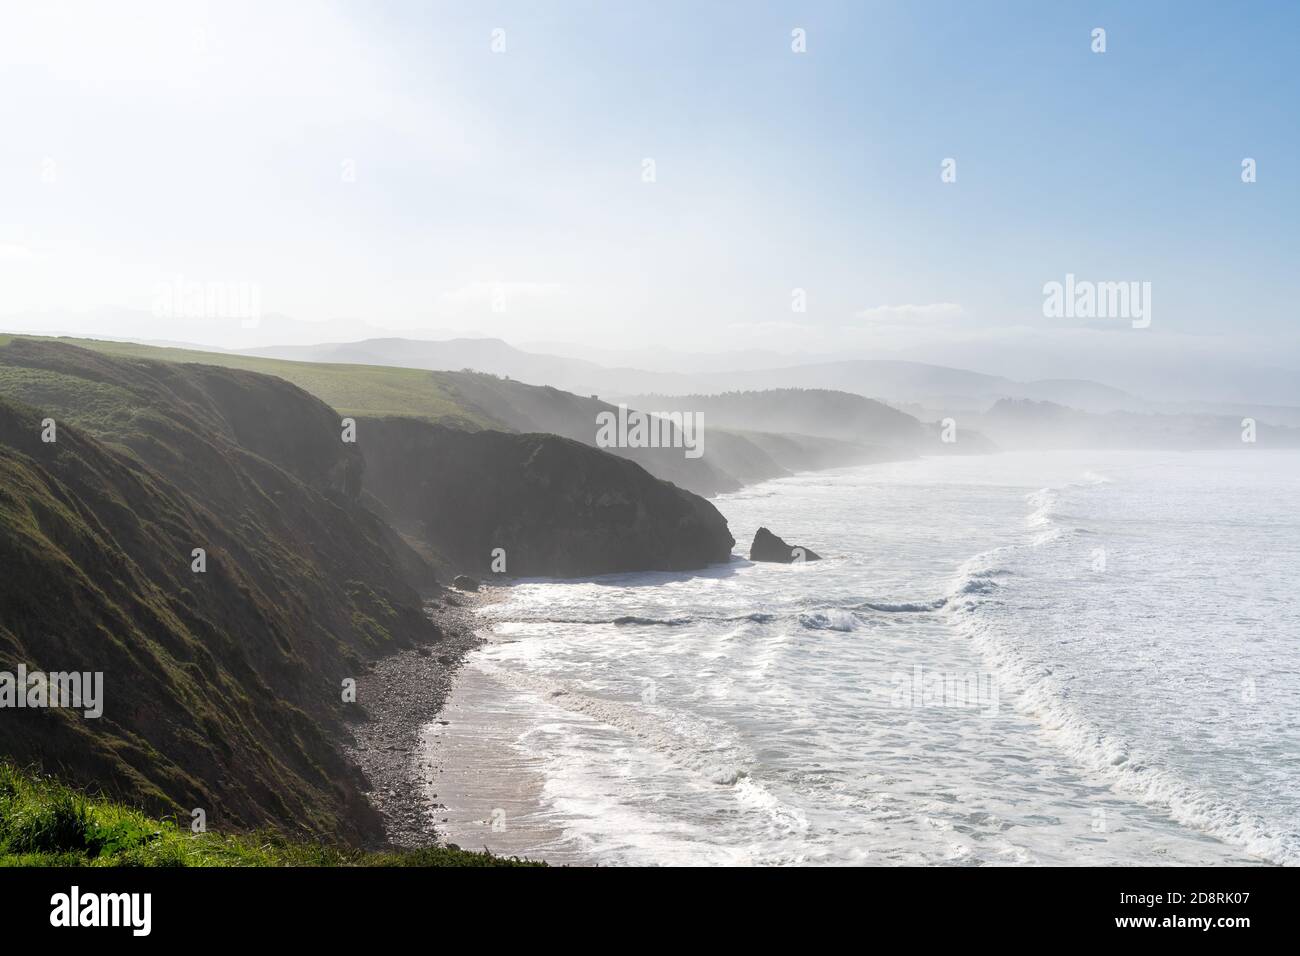 Tall green grassy cliffs drop down to the ocean coast in northern Spain Stock Photo